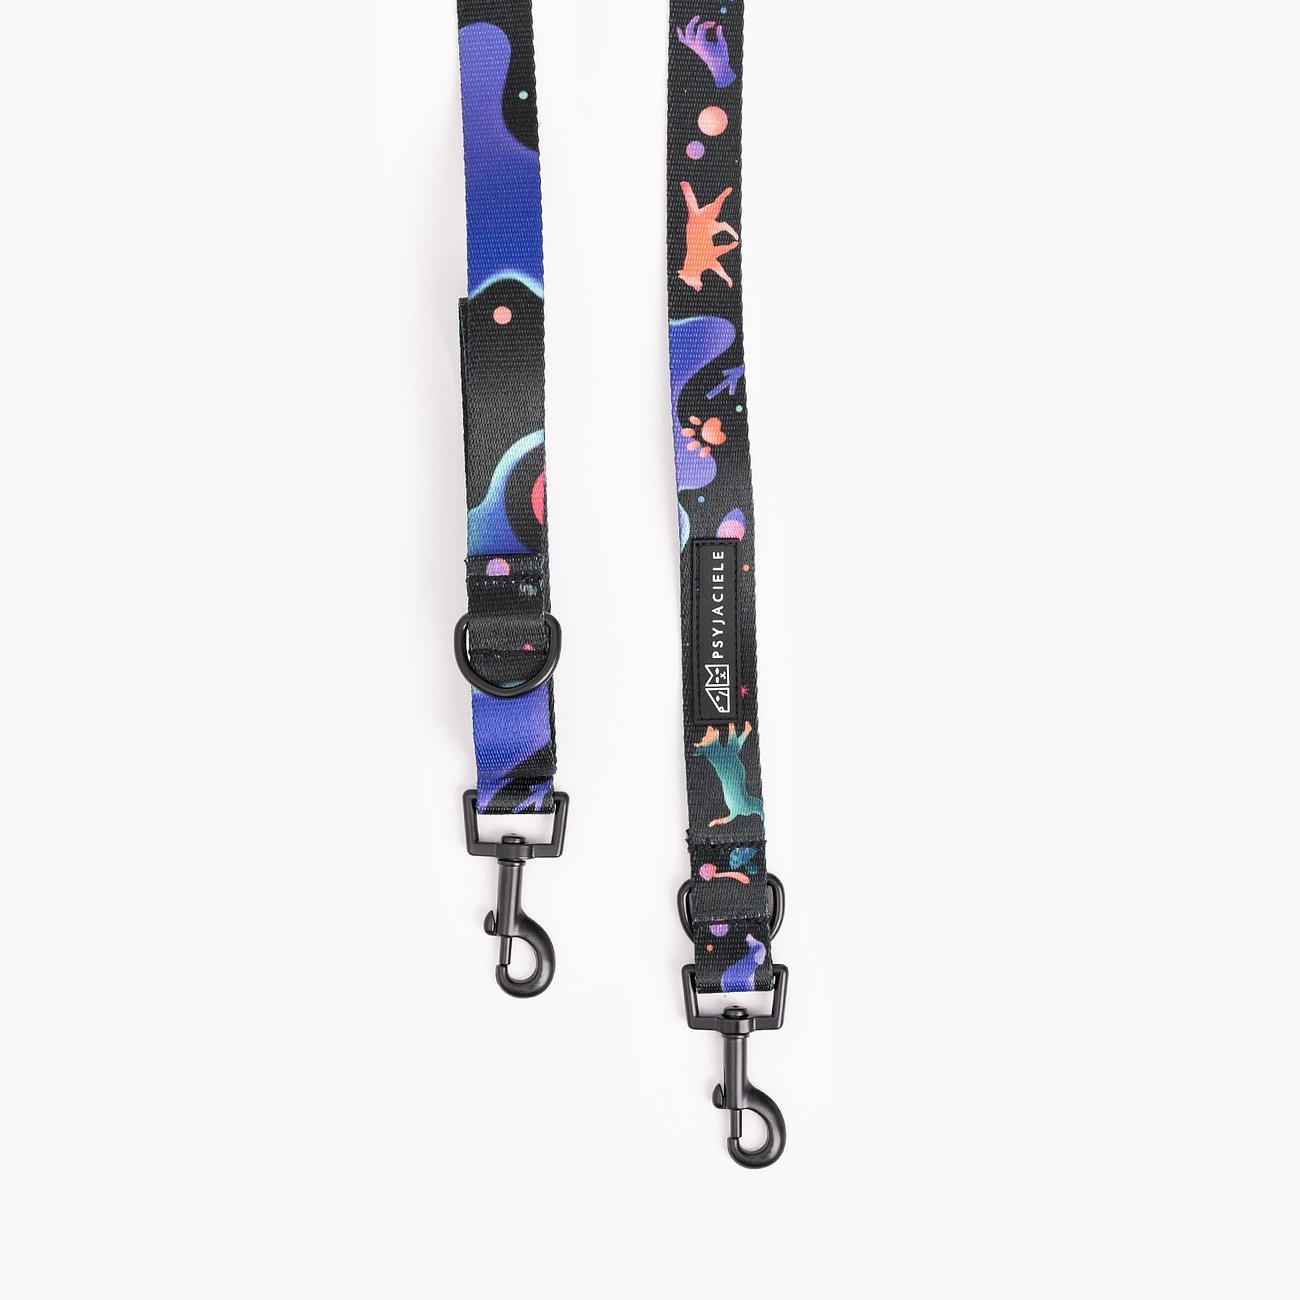 "Psychedelic" leash